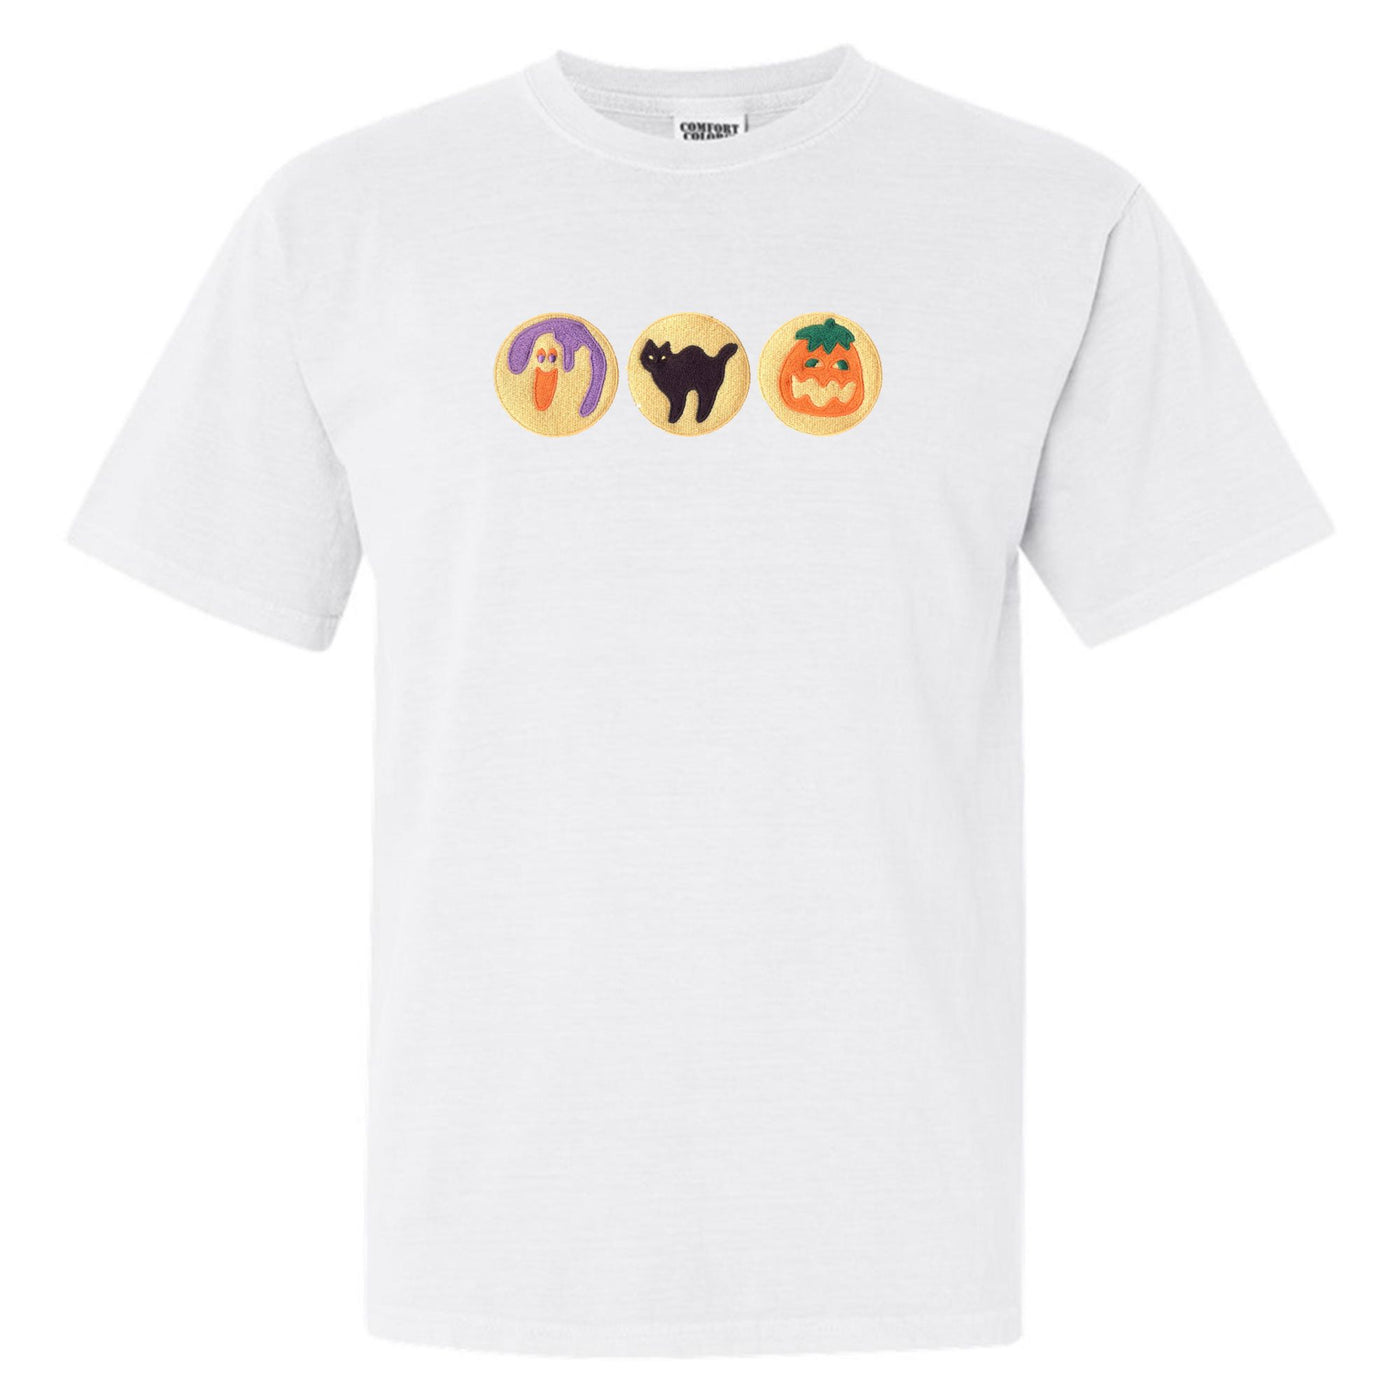 'Halloween Cookies' Embroidered T-Shirt